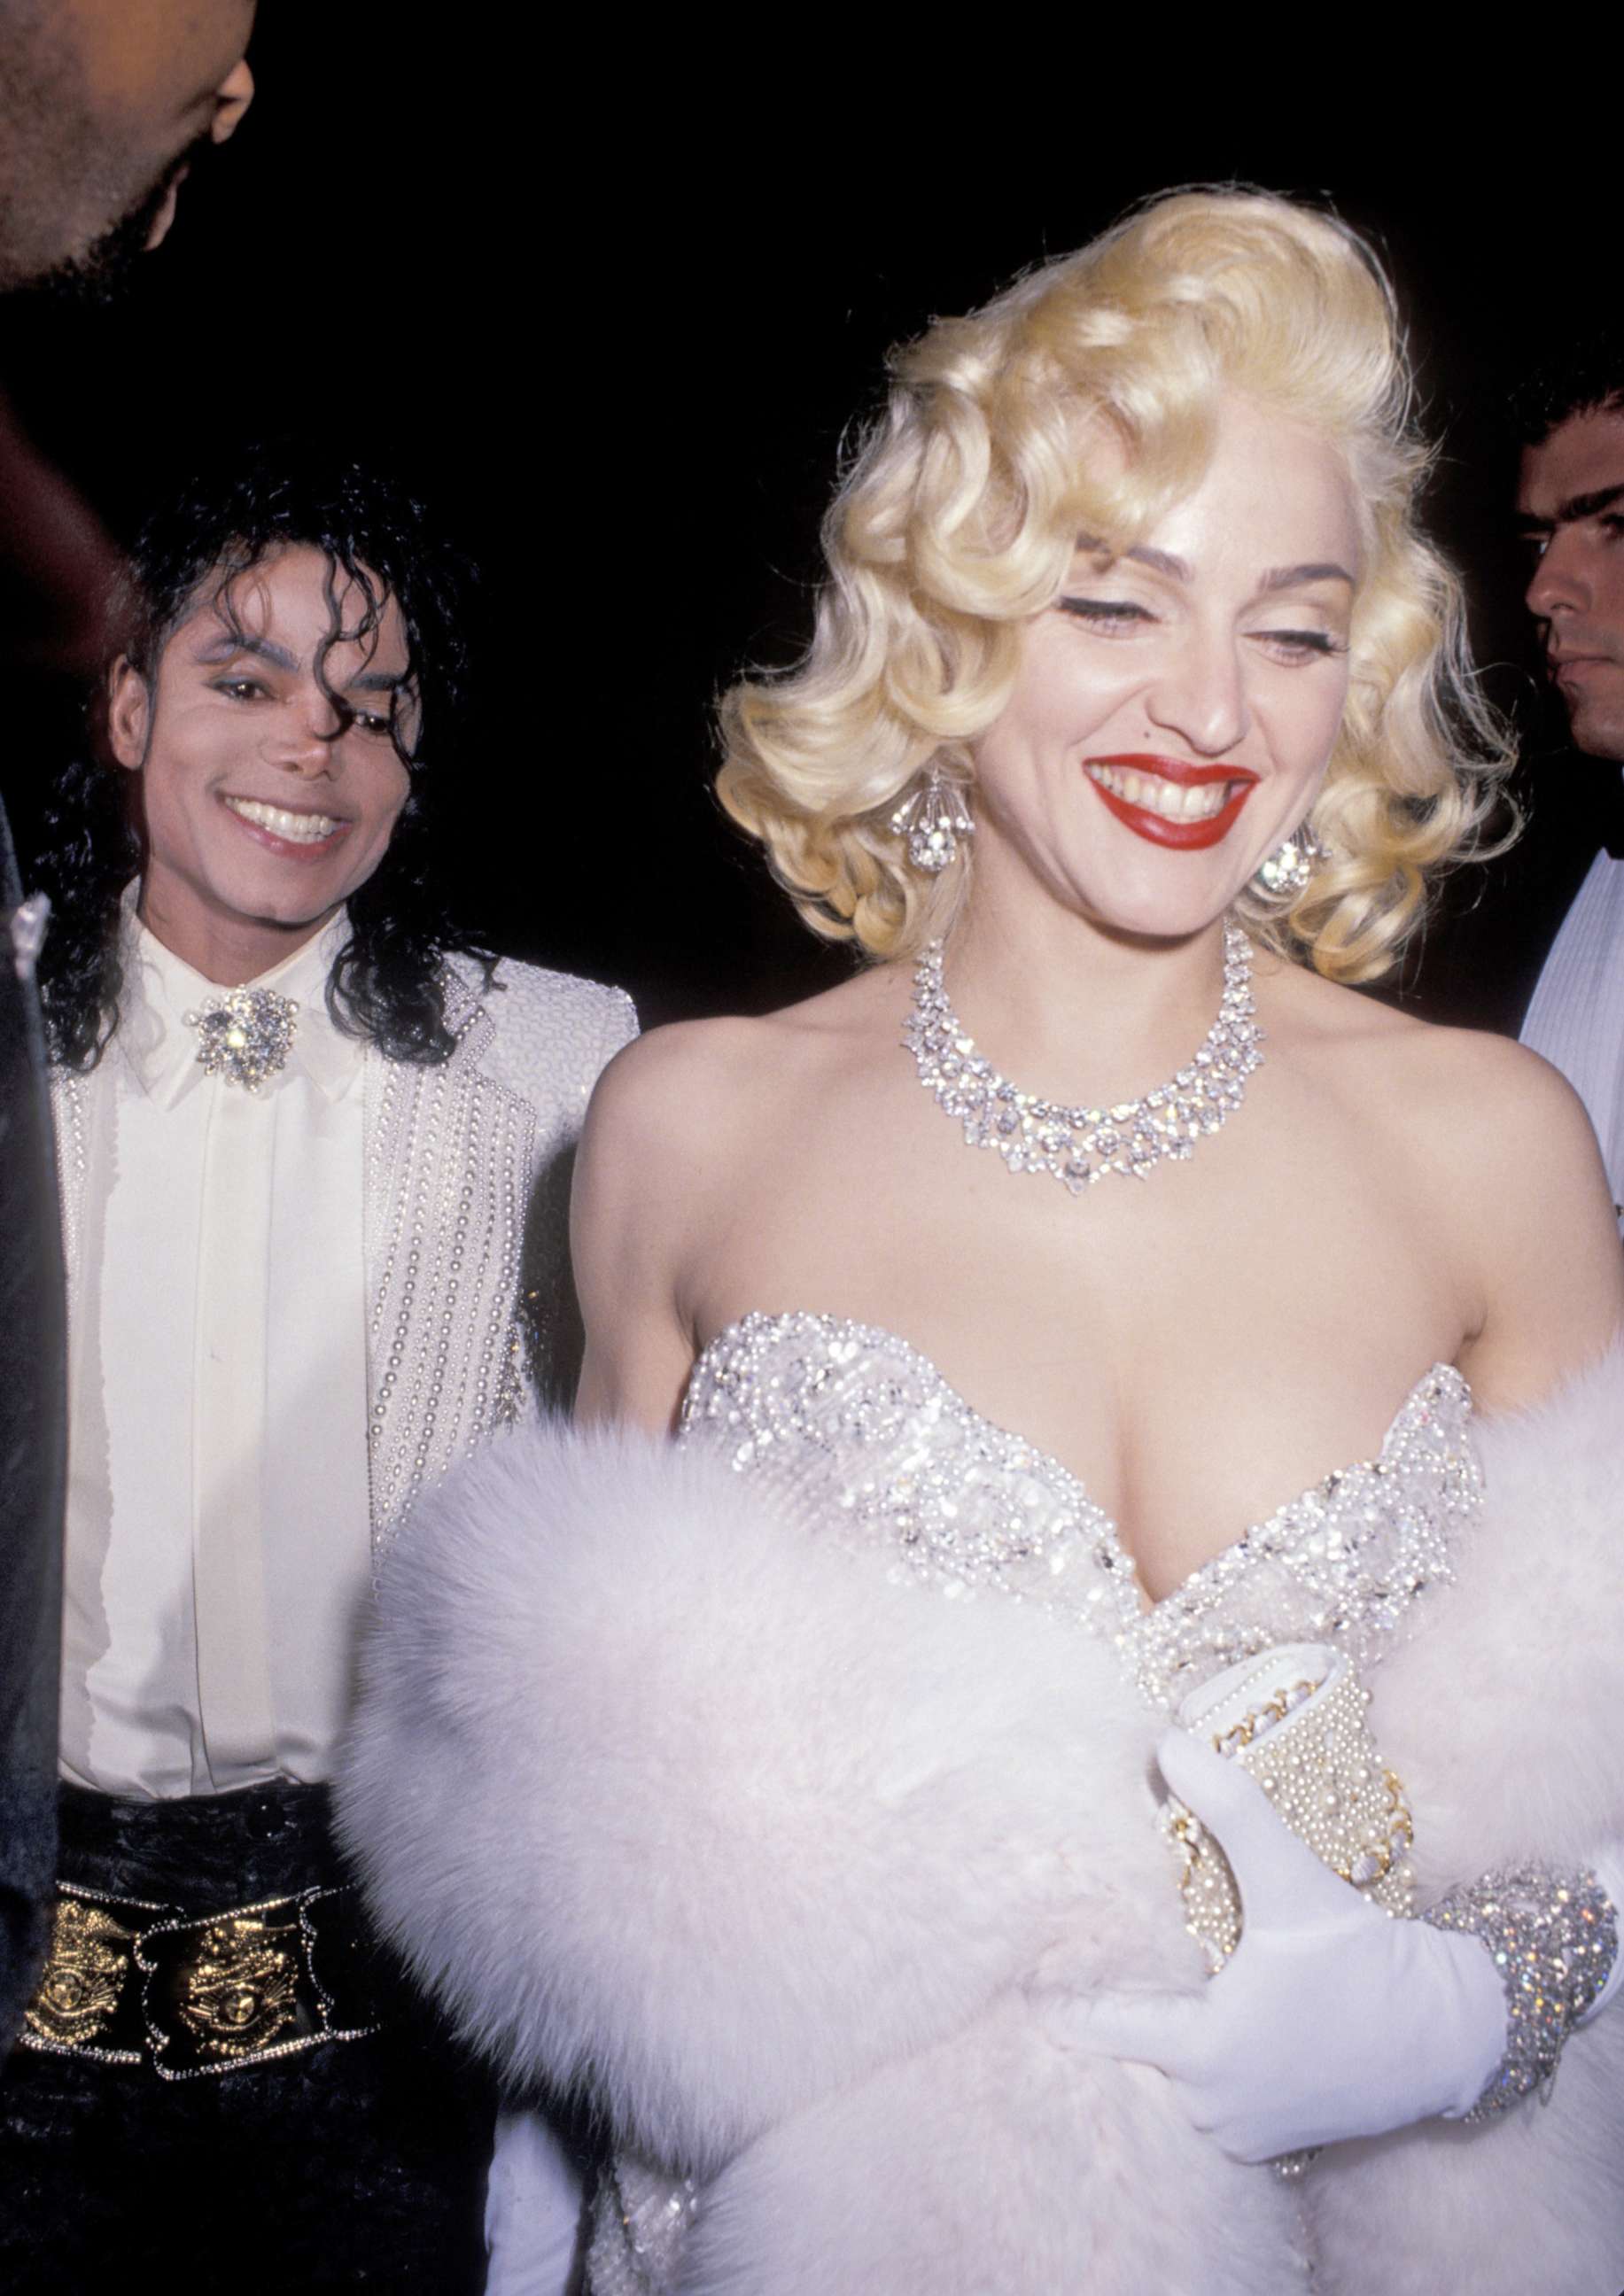 PHOTO: Michael Jackson and Madonna arrive for an Academy Awards after-party at Spago's in Los Angeles, March 25, 1991.